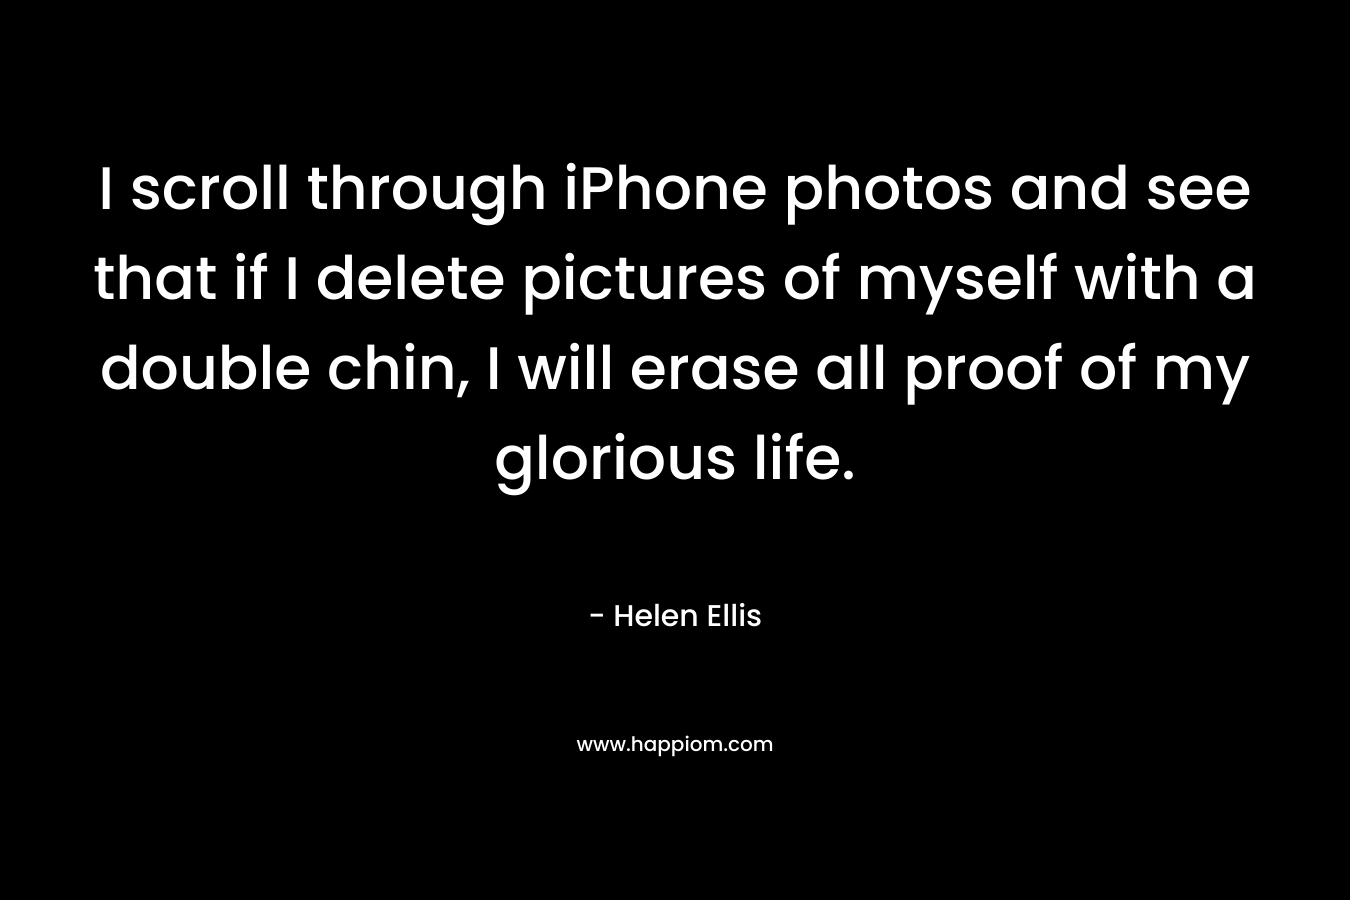 I scroll through iPhone photos and see that if I delete pictures of myself with a double chin, I will erase all proof of my glorious life. – Helen Ellis